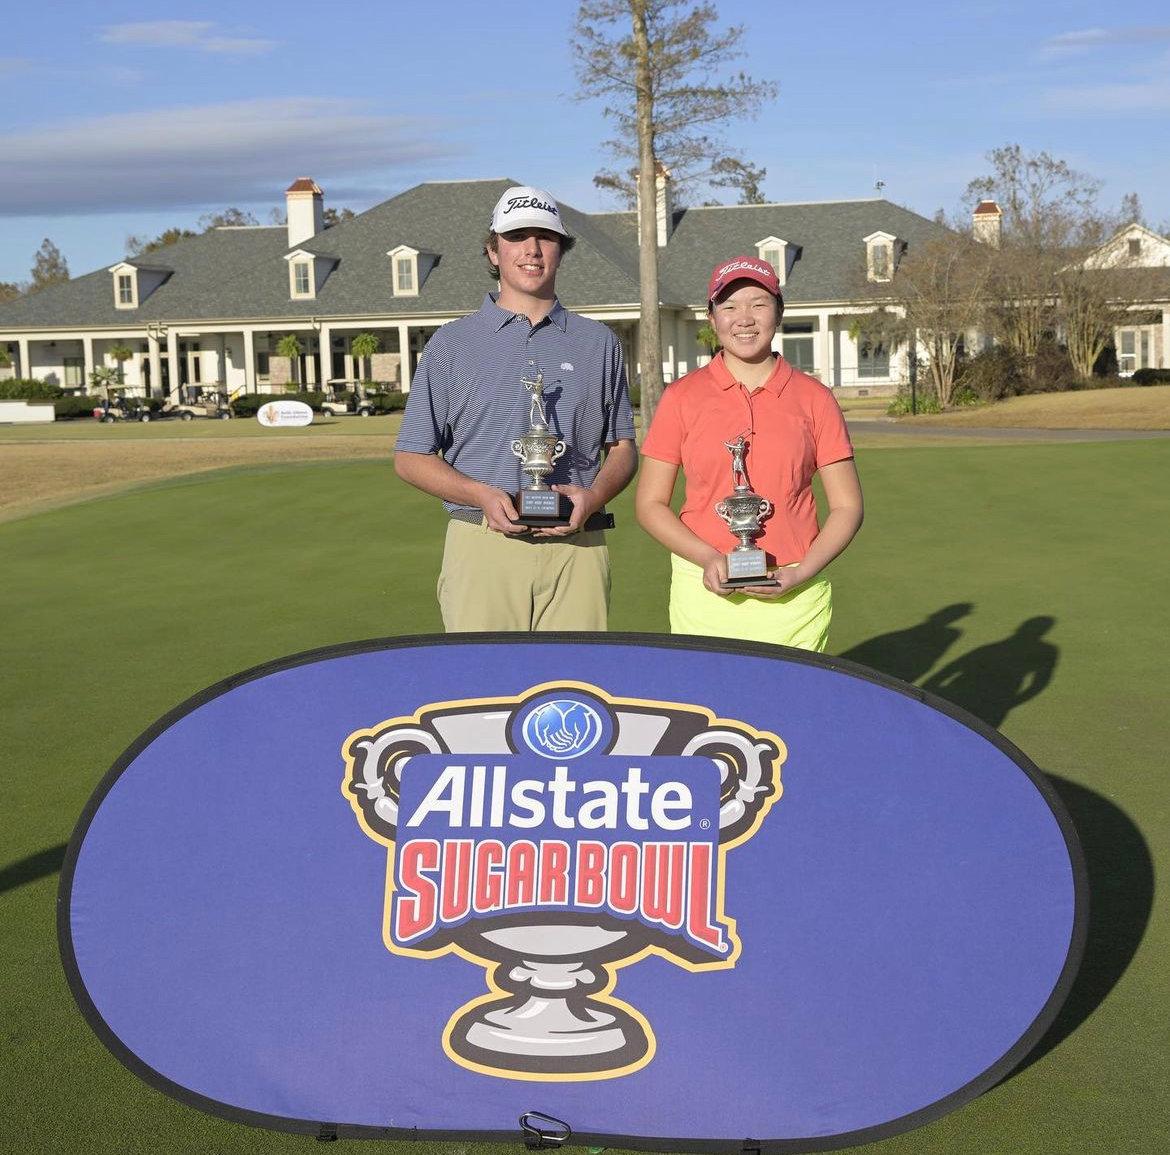 Trip Duke from Fairhope and Kenna Lee from Bellaire, Texas were crowned the winners of the 13-18 age group at the Allstate Sugar Bowl Tommy Moore Memorial at TPC Louisiana earlier this week. Duke finished with rounds of 69 and 73 before he won a playoff and Lee recorded two rounds of 72 for a five-stroke win.